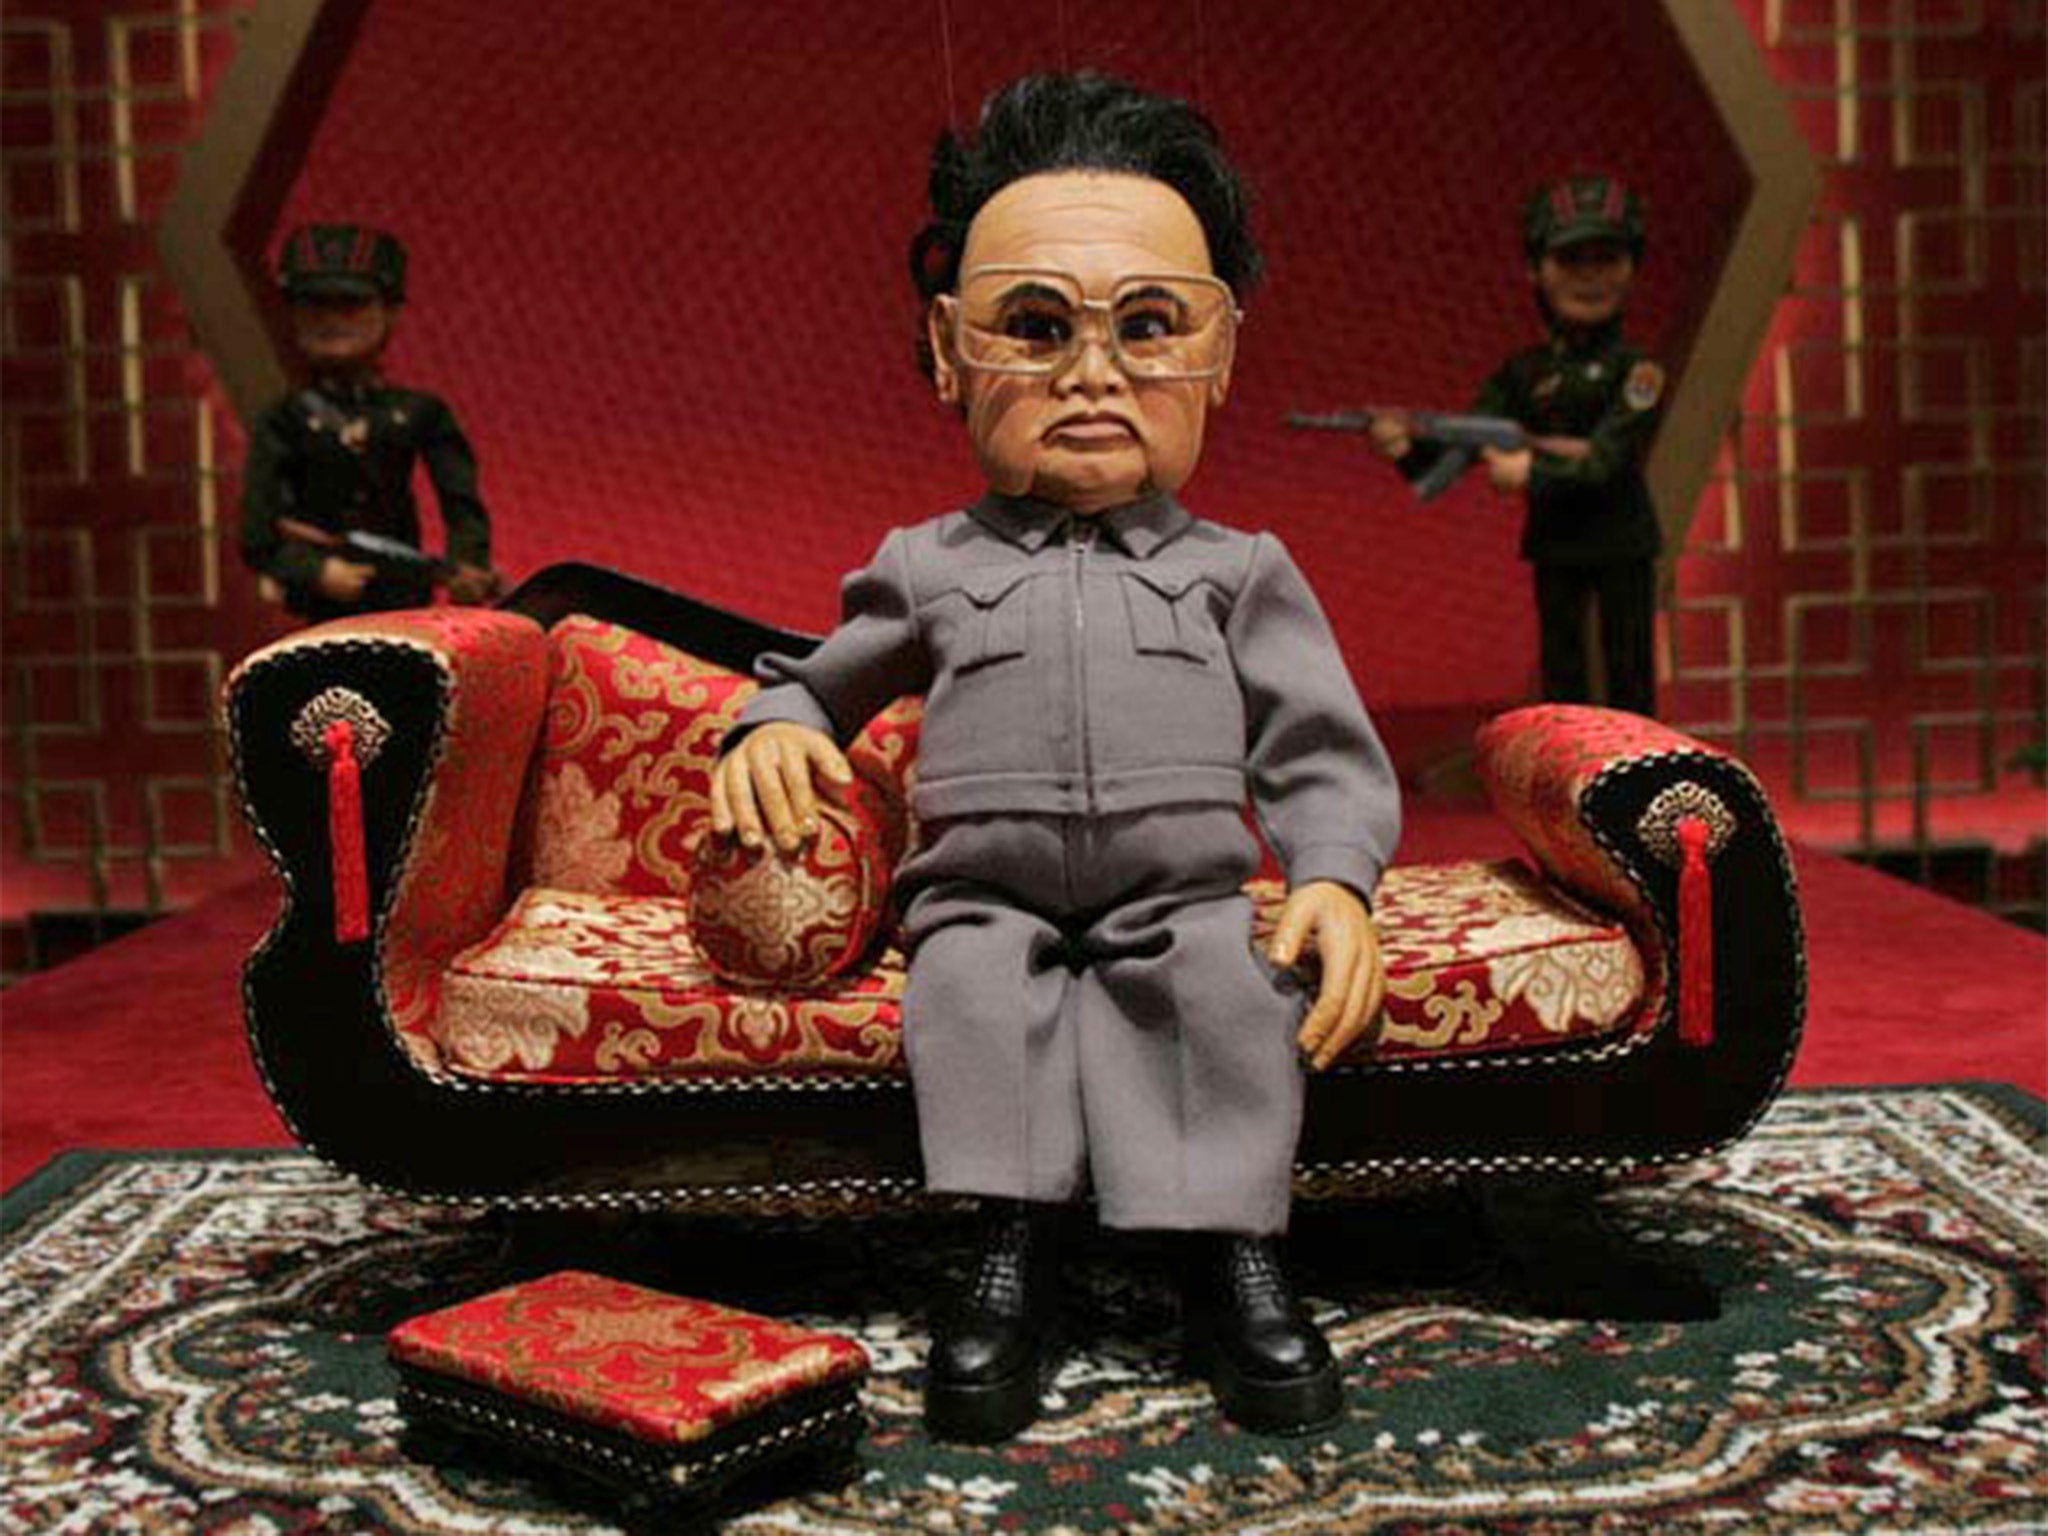 A scene from 'Team America: World Police' featuring a puppet depicting Kim Jong-Il